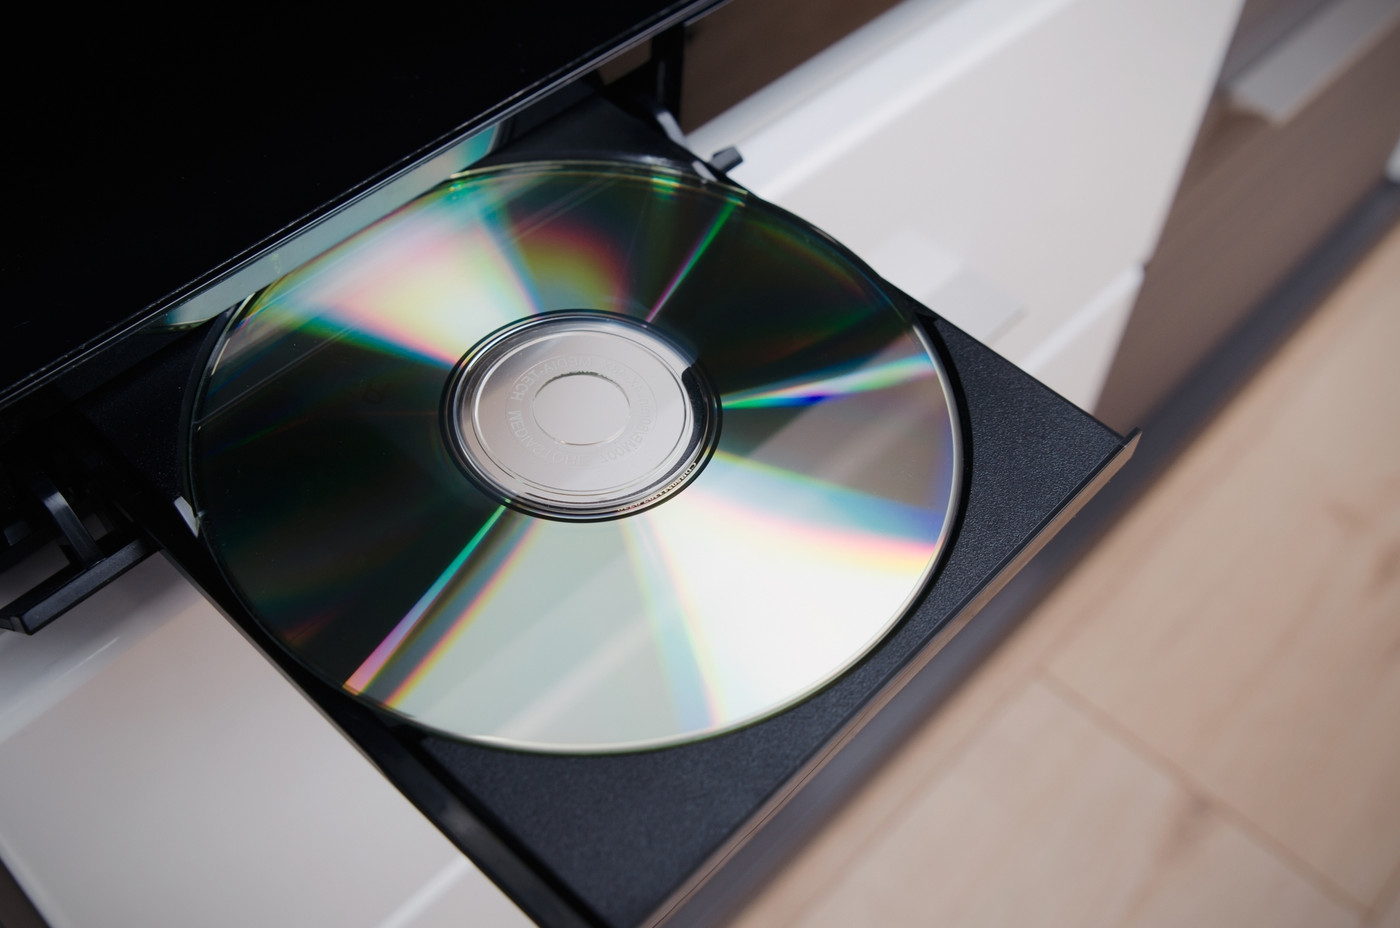 Blu-ray or DVD player with inserted disc